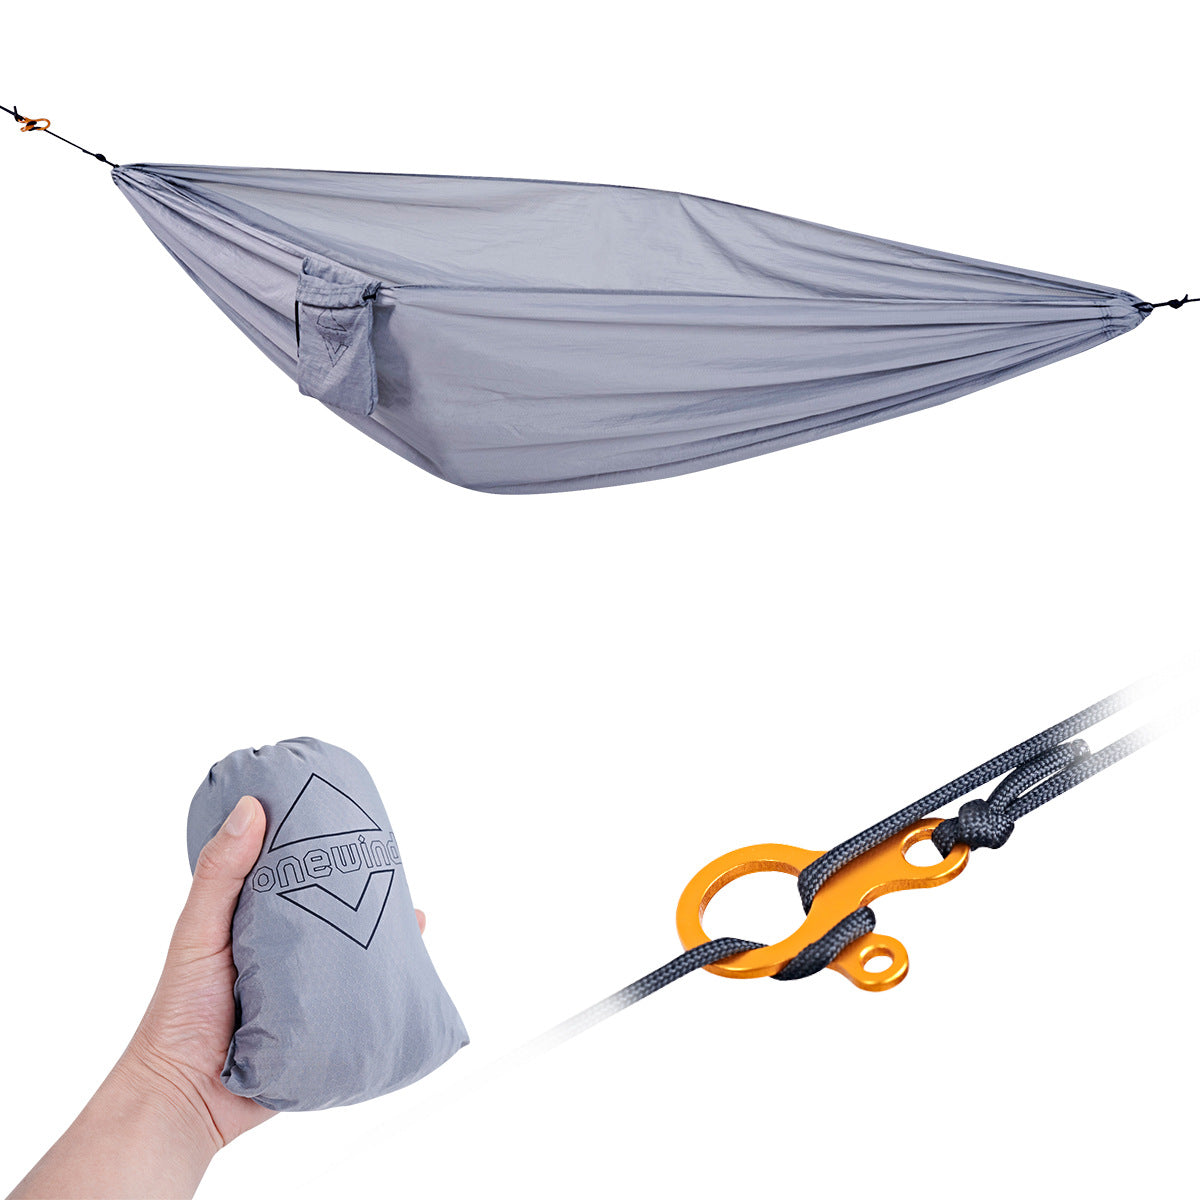 Where to Buy a Hammock Near Me | Onewind Outdoors